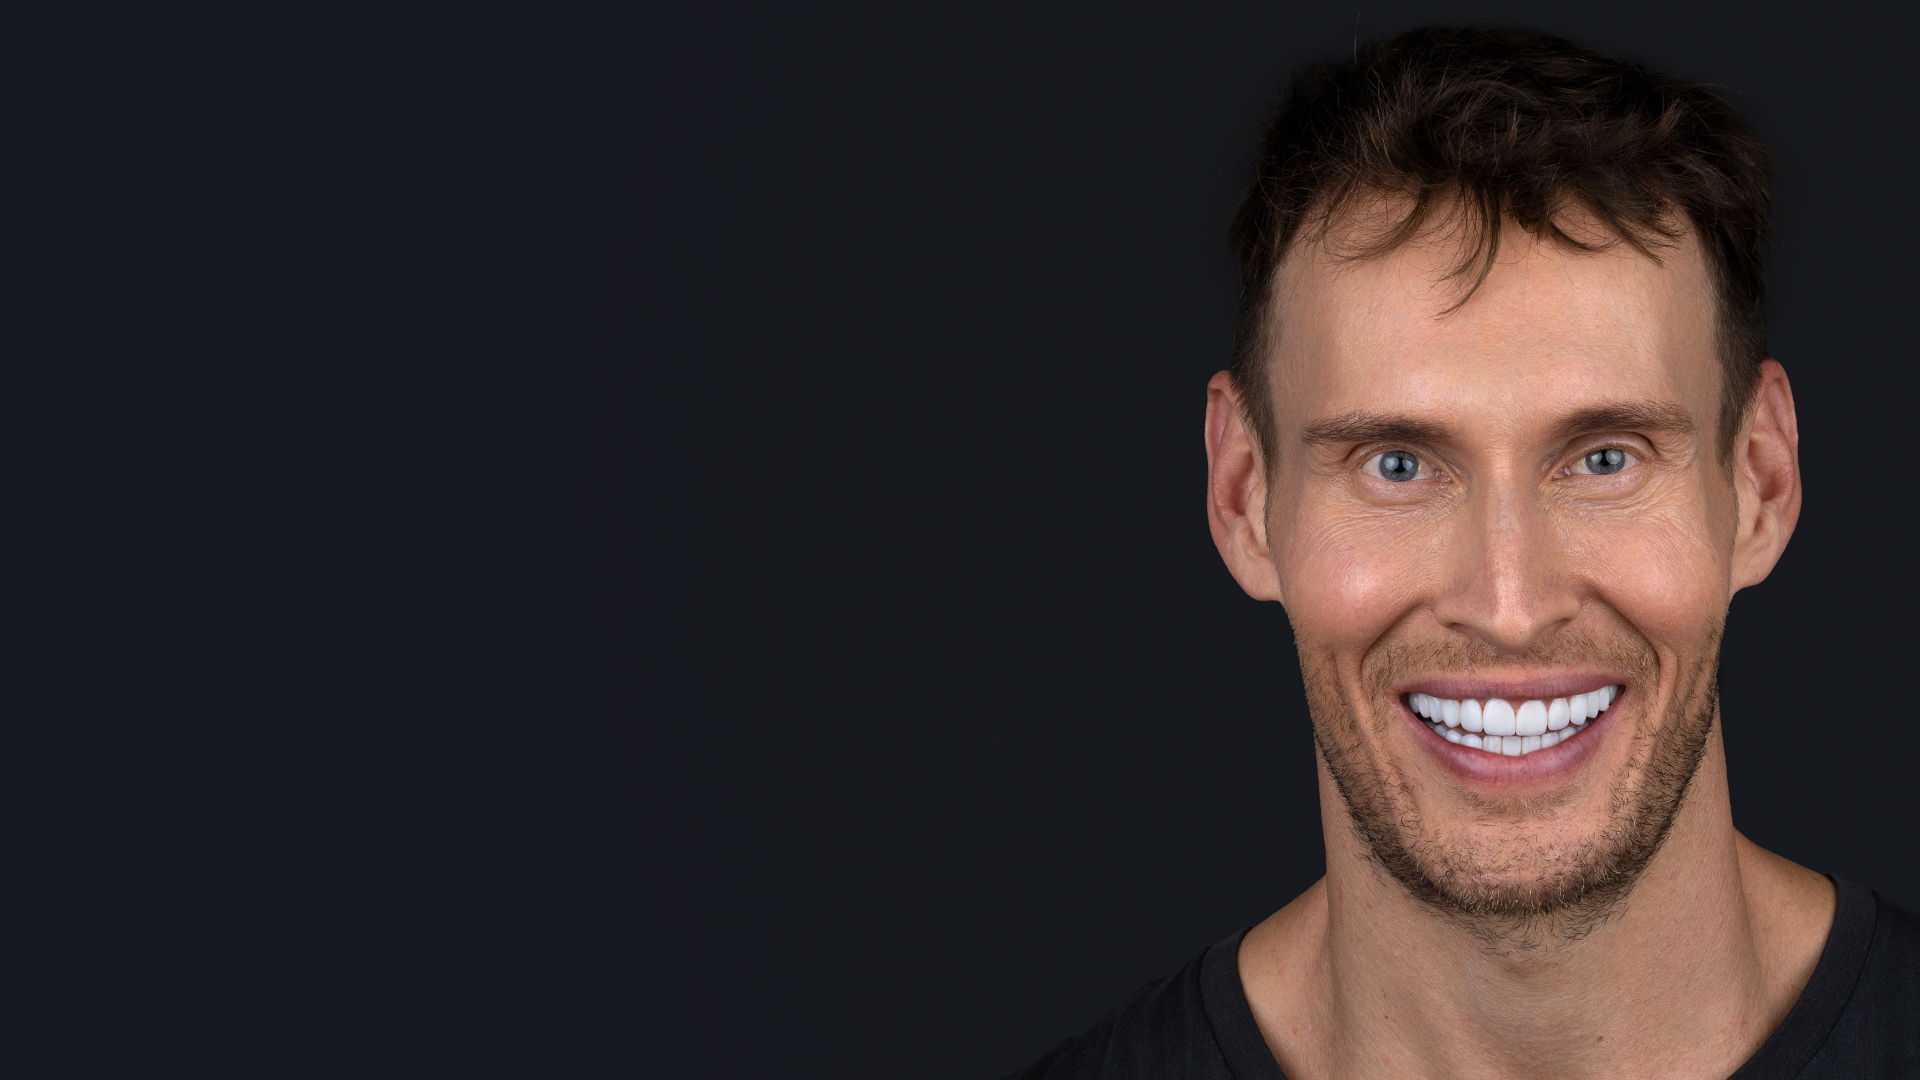 Luke Hines smile makeover with veneers and Invisalign